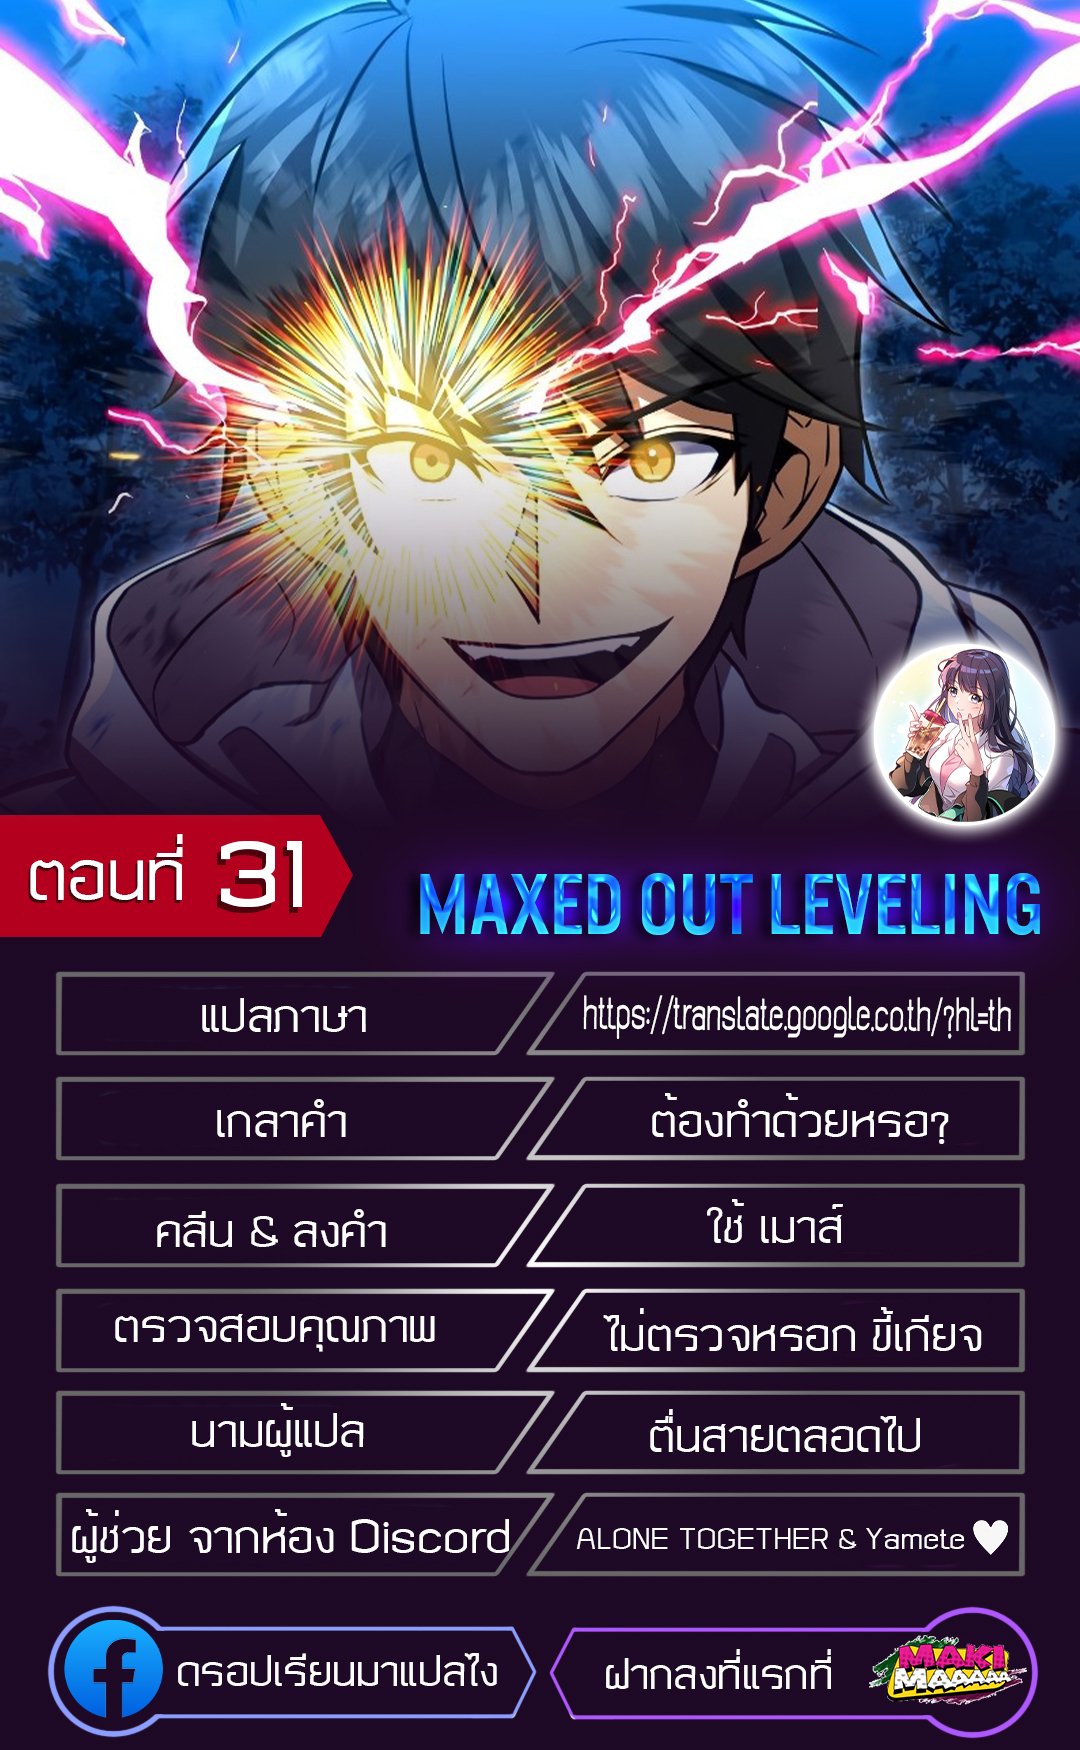 Maxed Out Leveling31 1